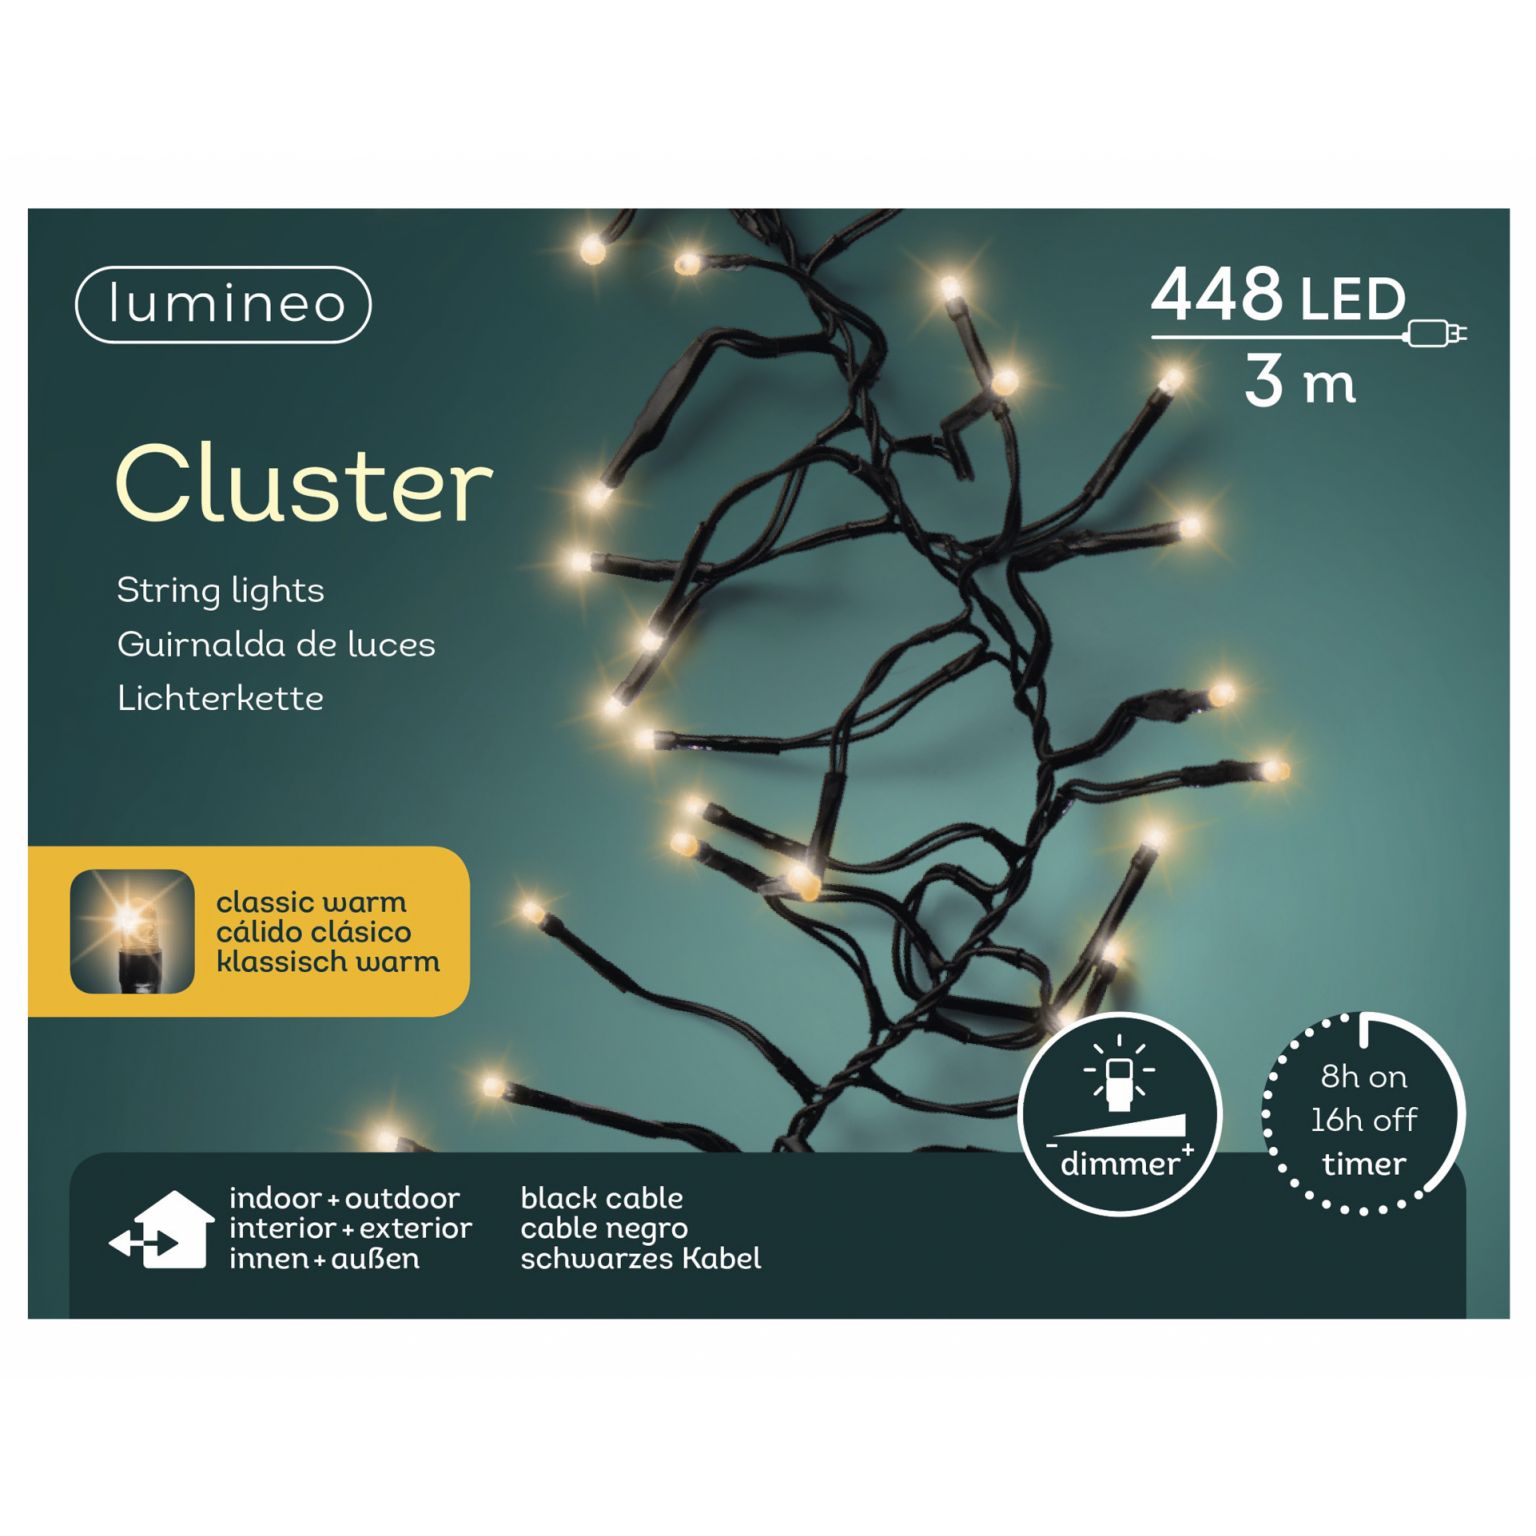 Clusterverlichting lumineo 448-lamps LED 'classic warm'